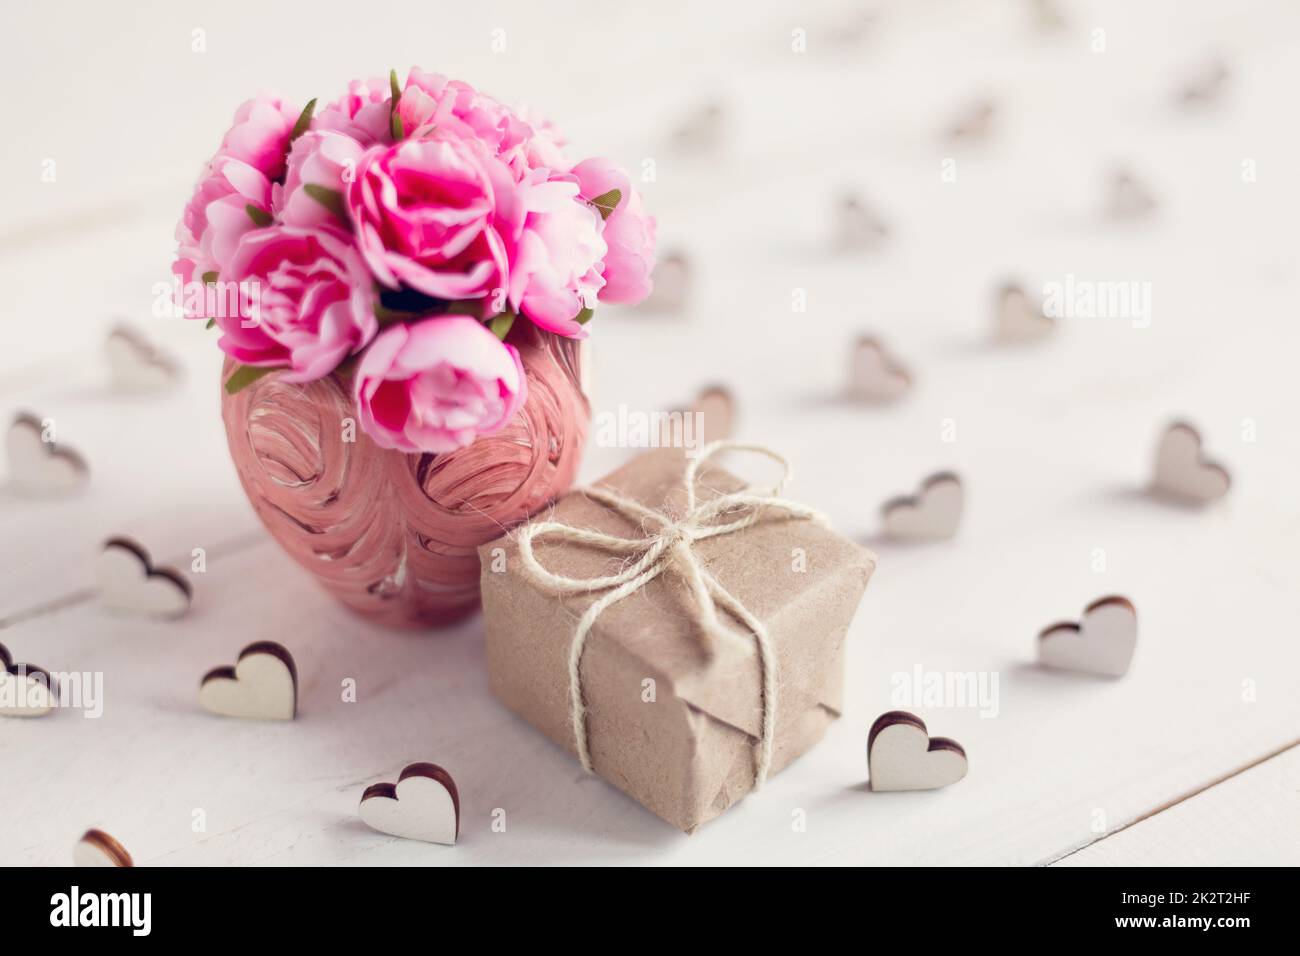 Little pink roses in a beautiful vase and a little gift wrapped in kraft paper. Stock Photo